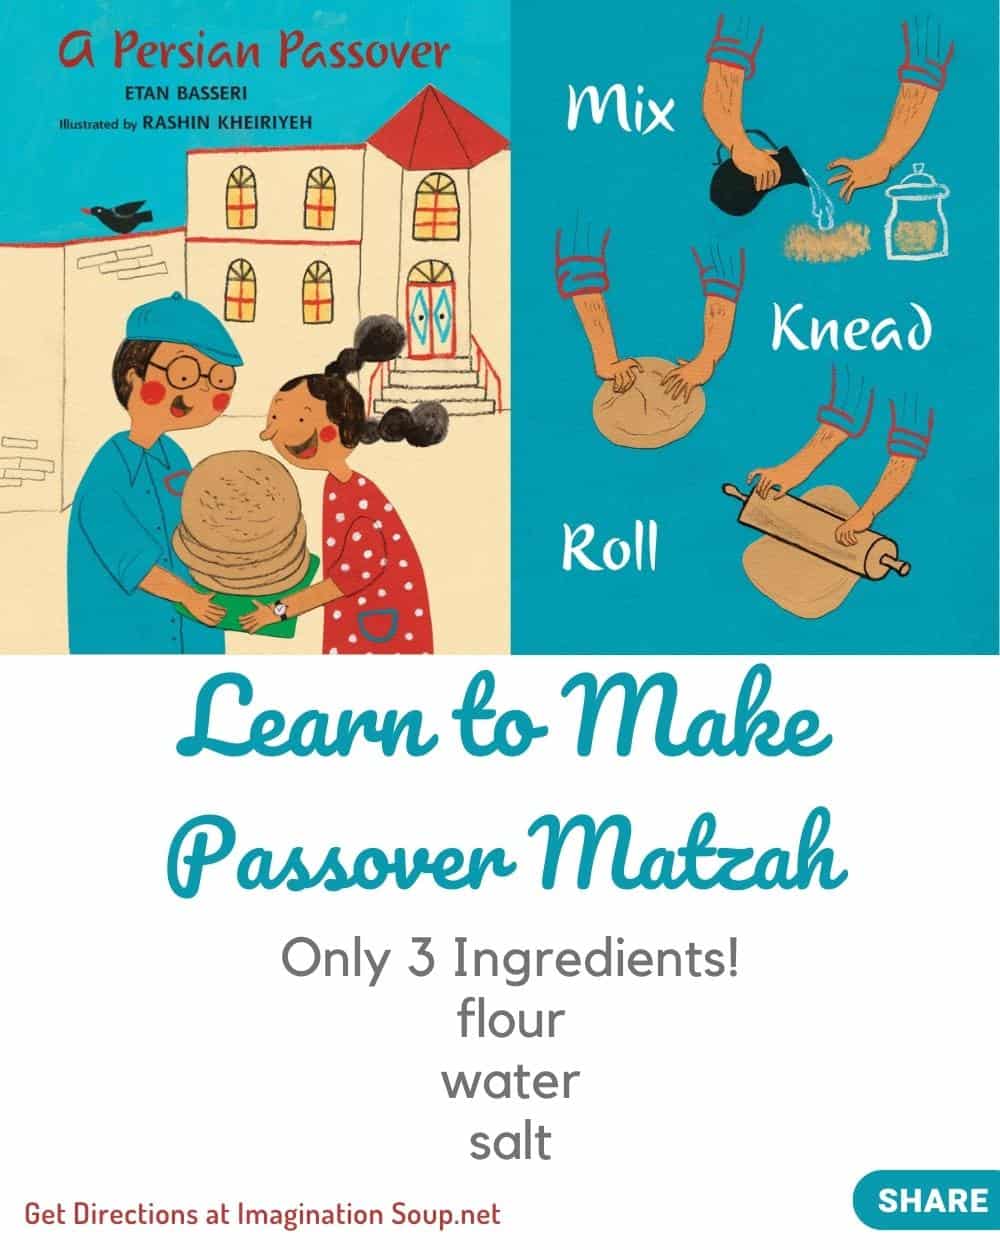 How to Make Passover Matzah (from A Persian Passover)